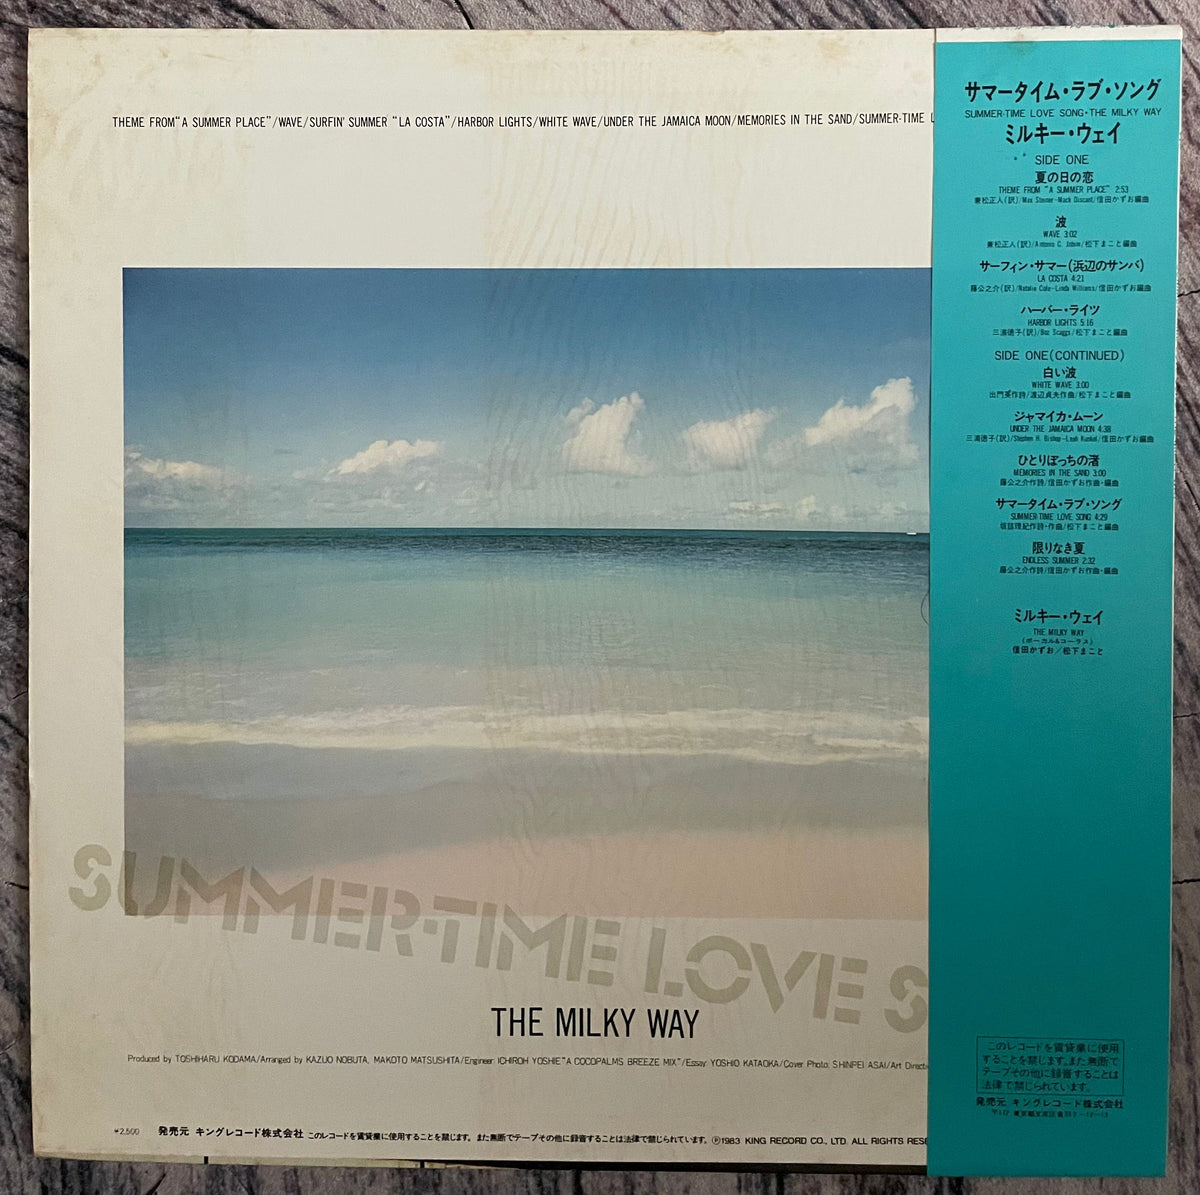 The Milky Way - Summer-Time Love – Galapagos Records